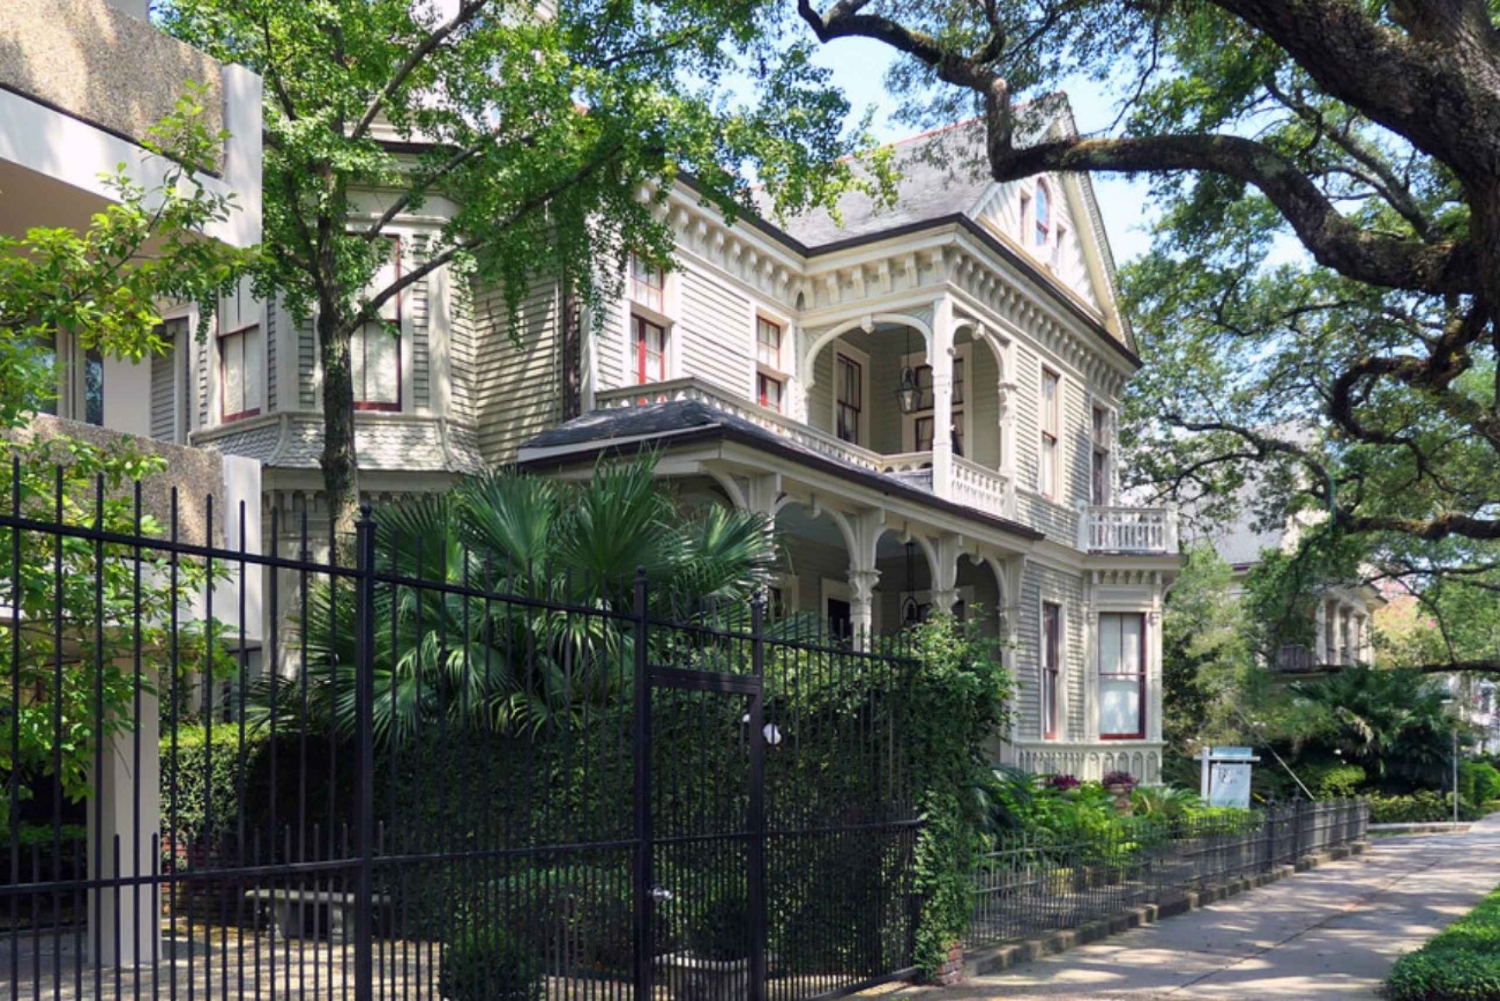 New Orleans: Tombs and Mansions of the Garden District